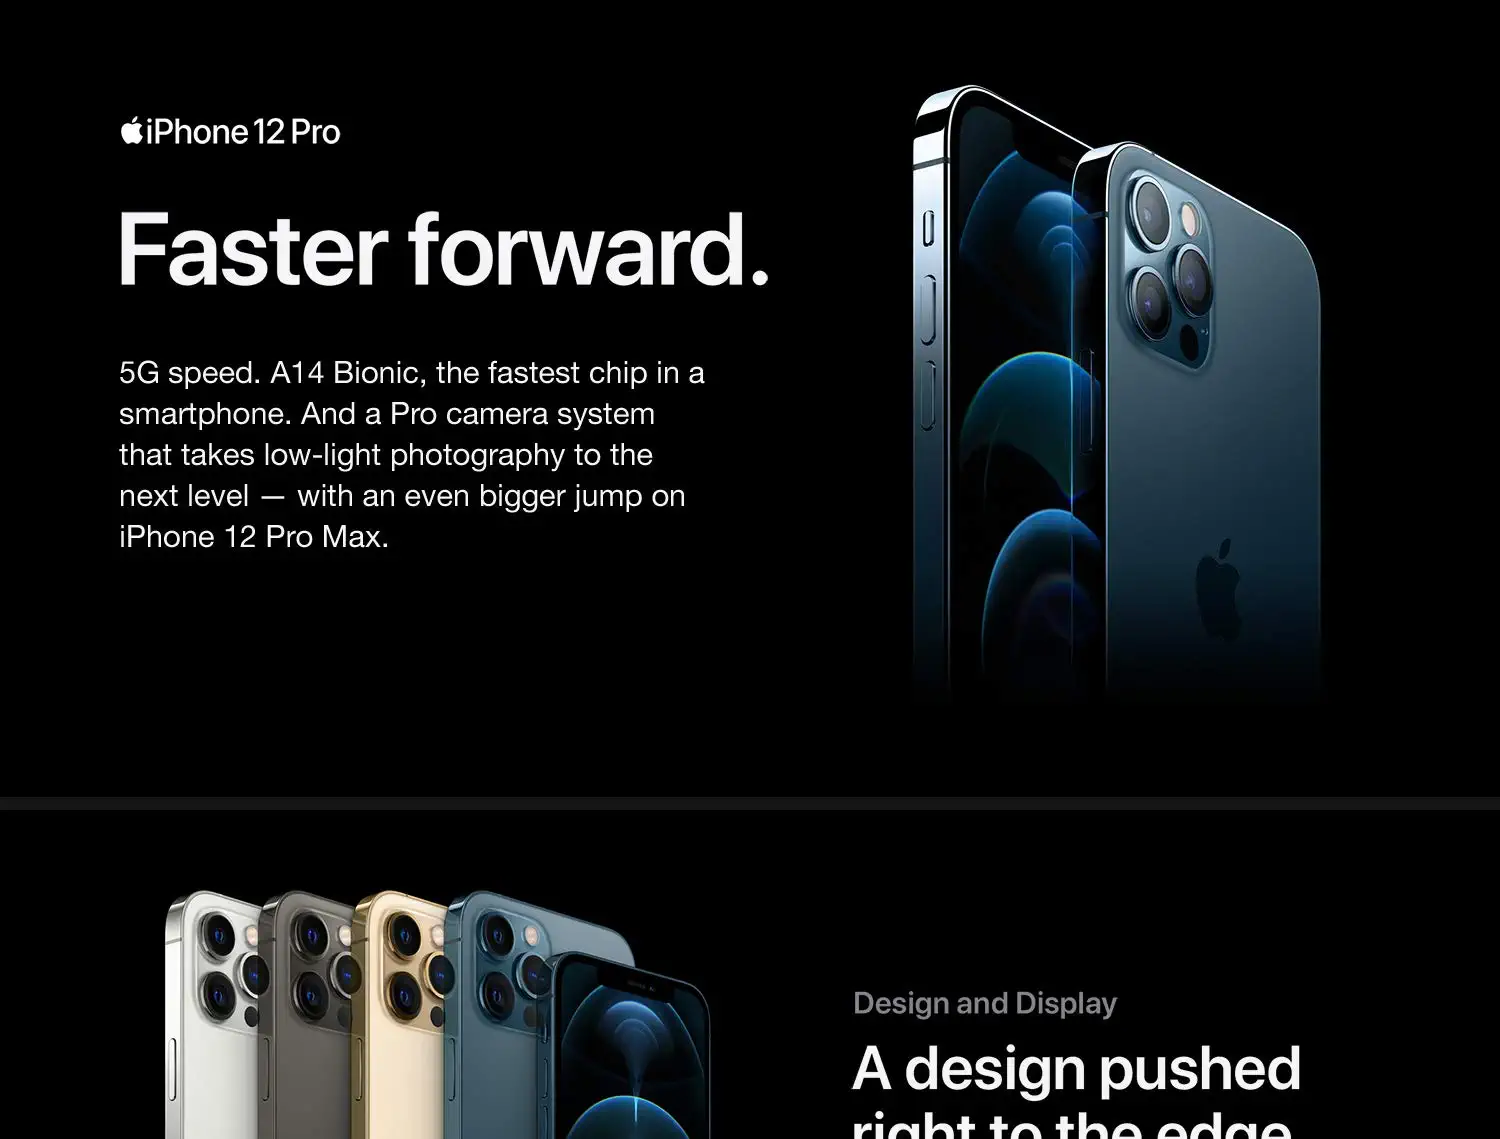 Iphone 12 Pro. 5G Speed. A14 Bionic, The Fastest Chip In A Smartphone.